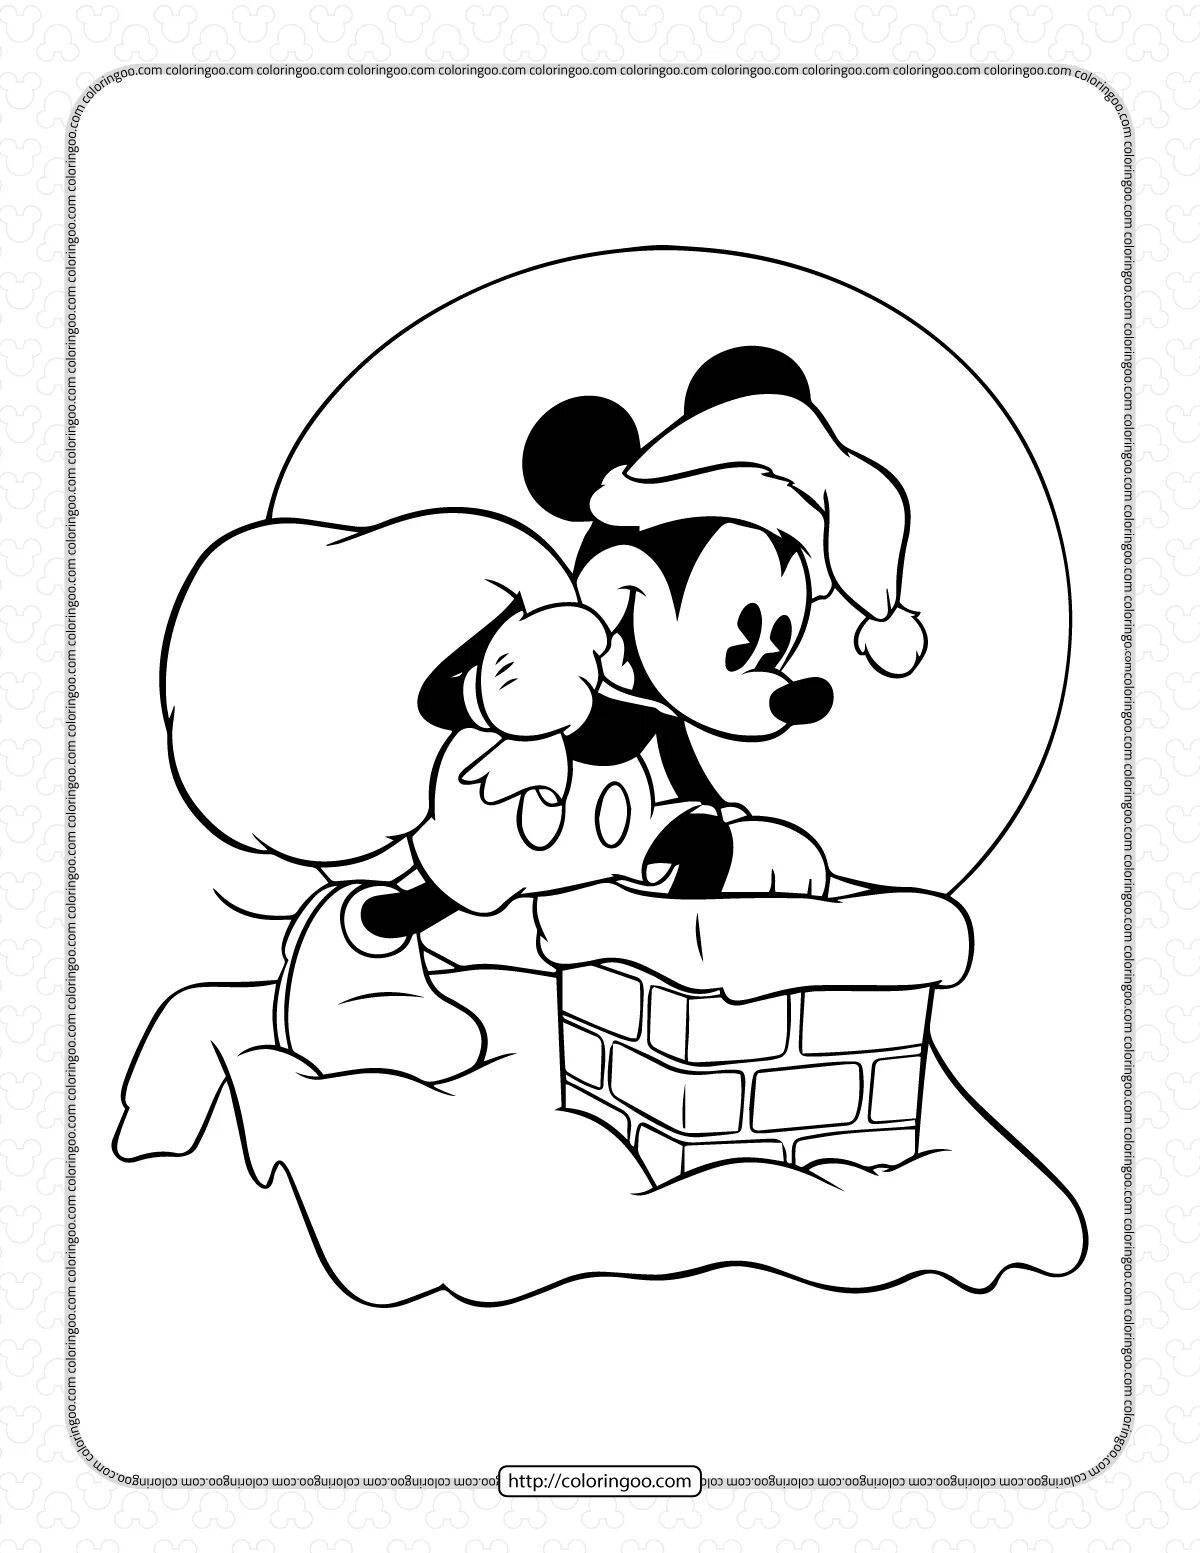 Gorgeous Mickey Mouse Christmas coloring book